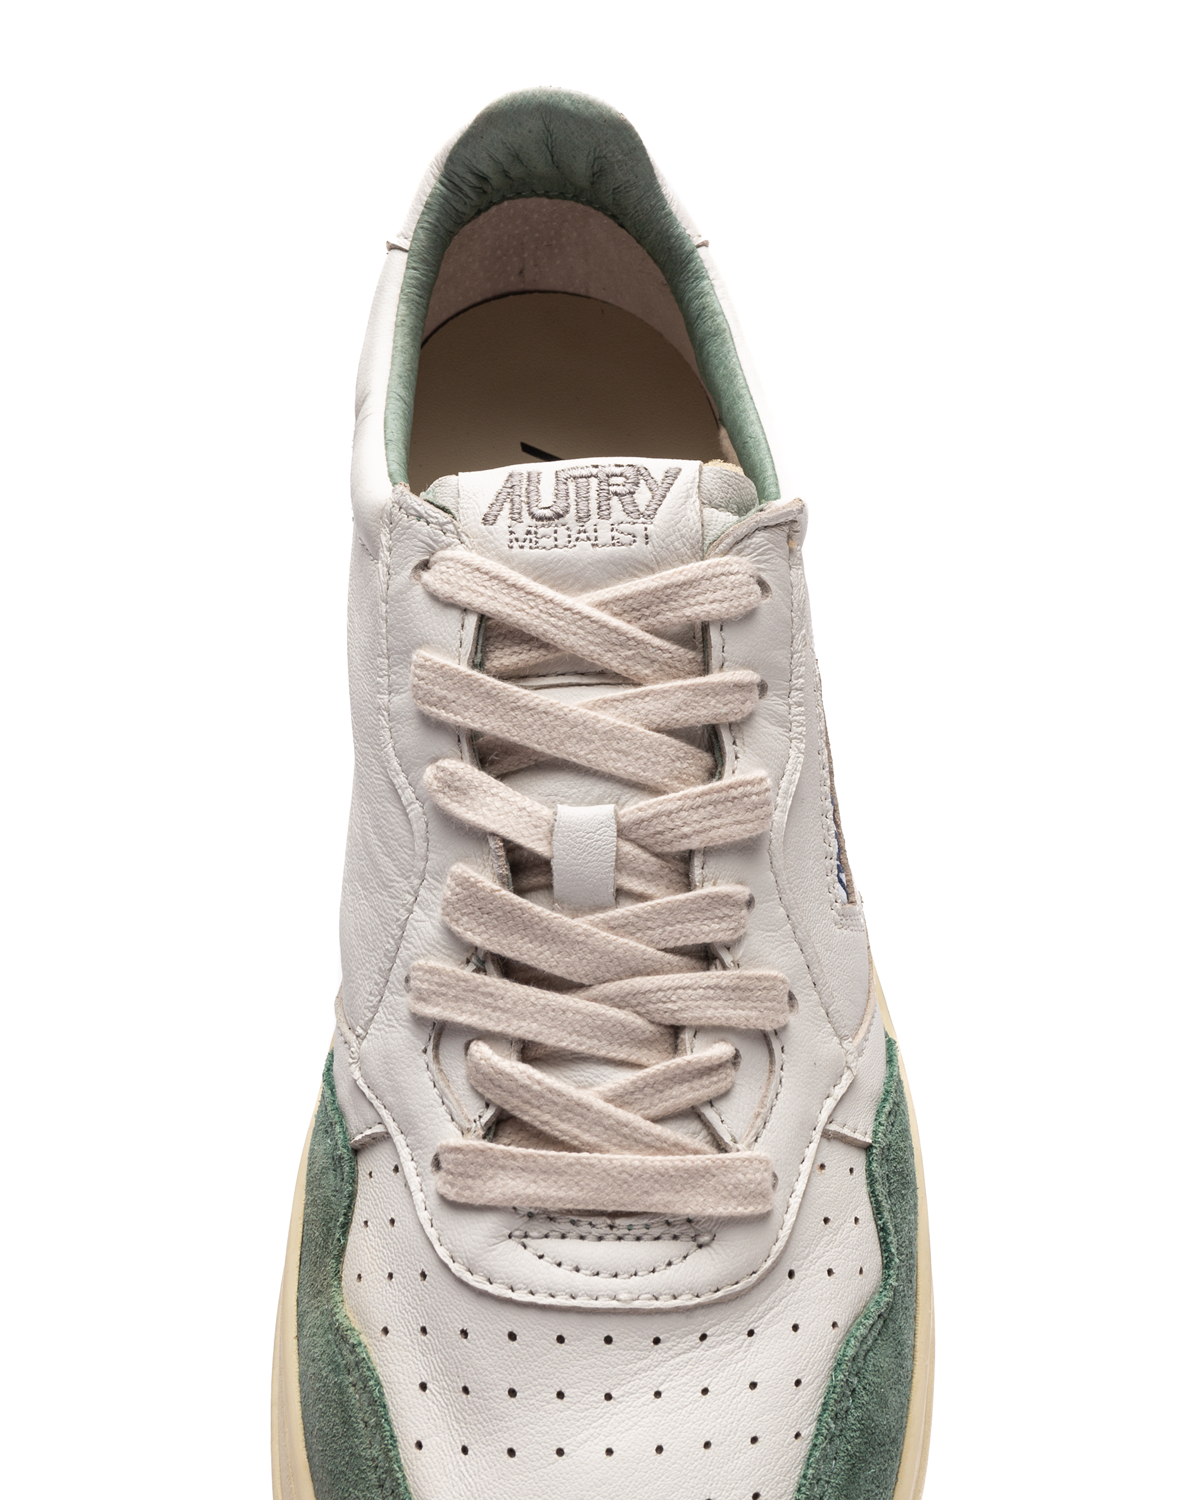 Medalist Goat Suede White/Military Green